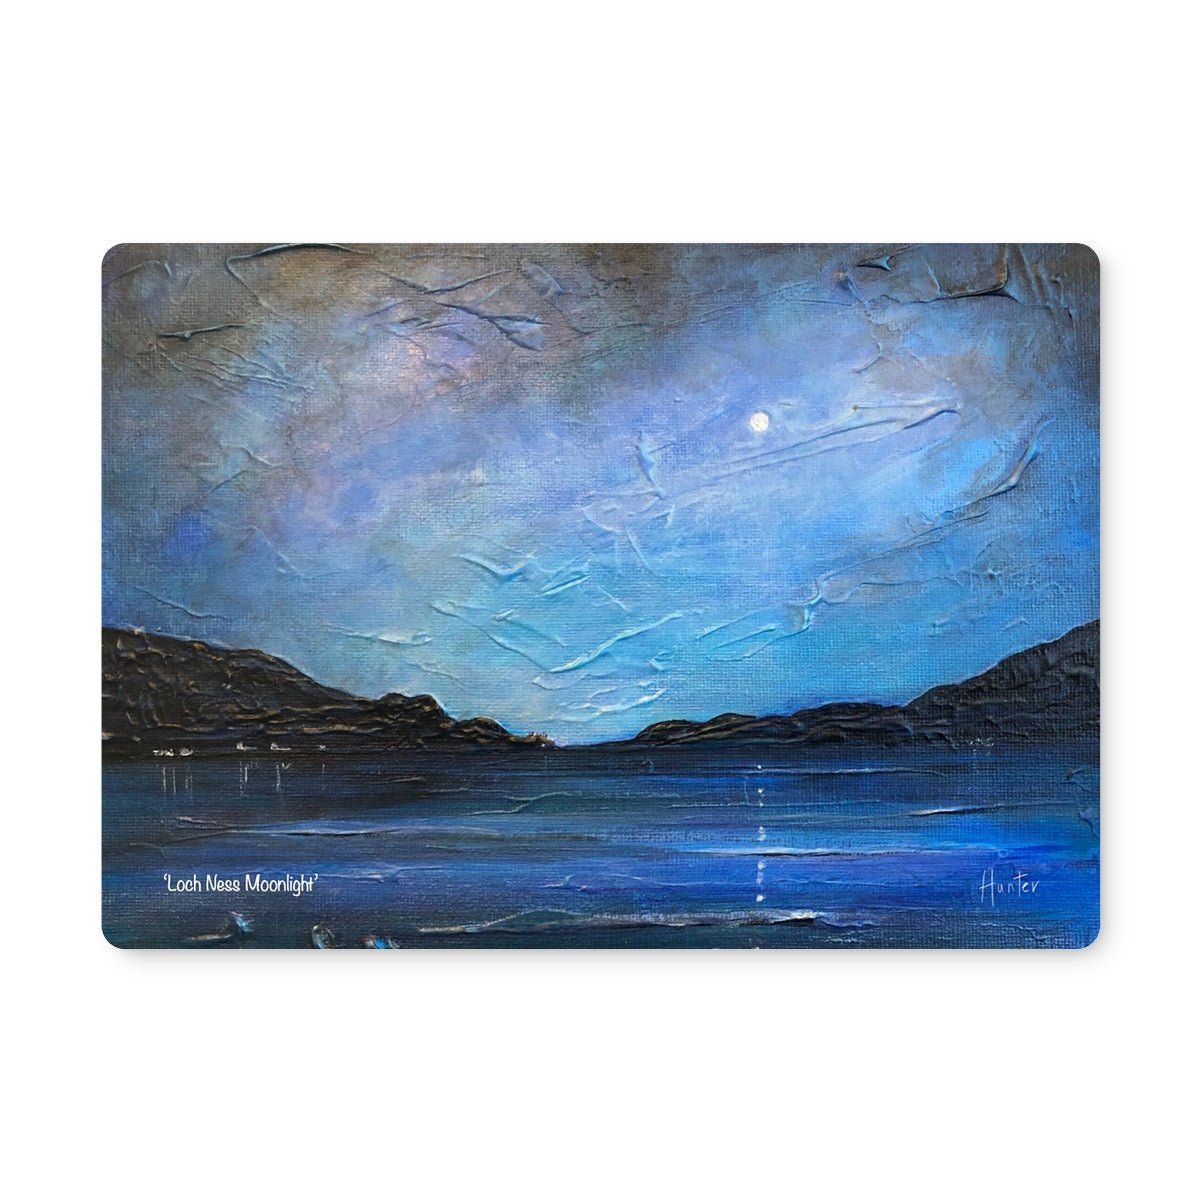 Loch Ness Moonlight Art Gifts Placemat-Placemats-Scottish Lochs & Mountains Art Gallery-2 Placemats-Paintings, Prints, Homeware, Art Gifts From Scotland By Scottish Artist Kevin Hunter